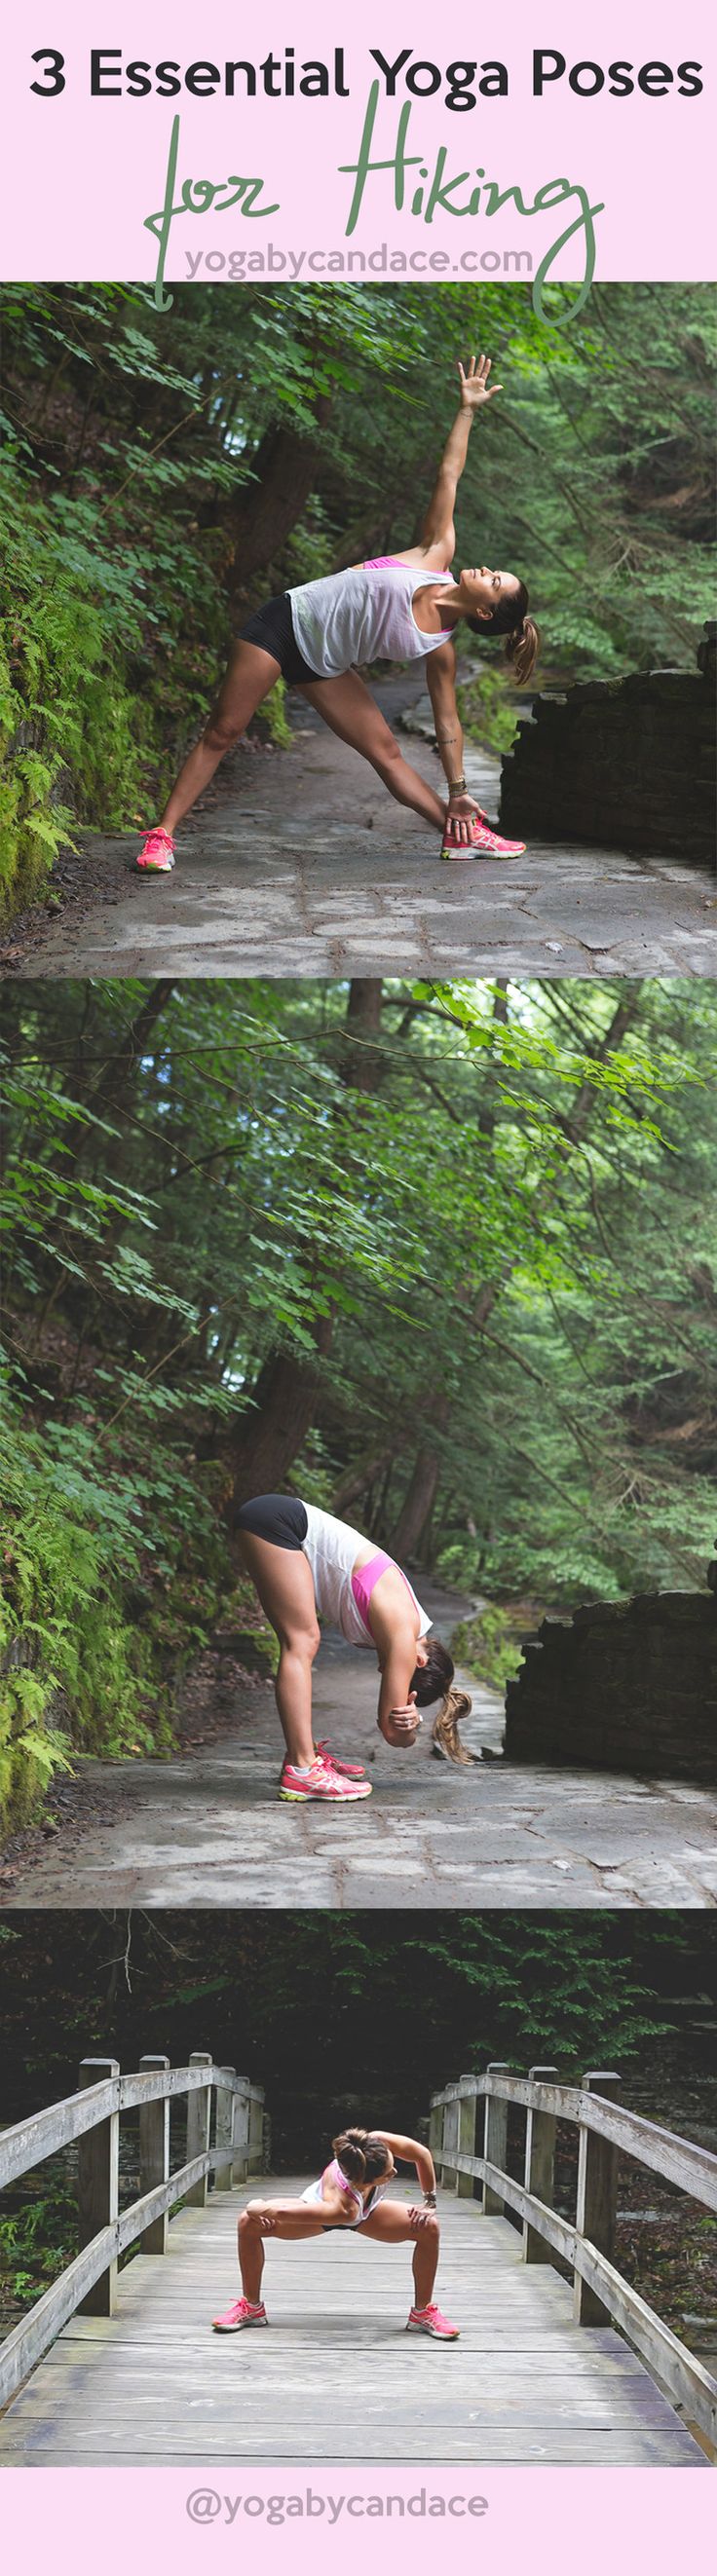 Pin now, practice yoga later - yoga for hiking